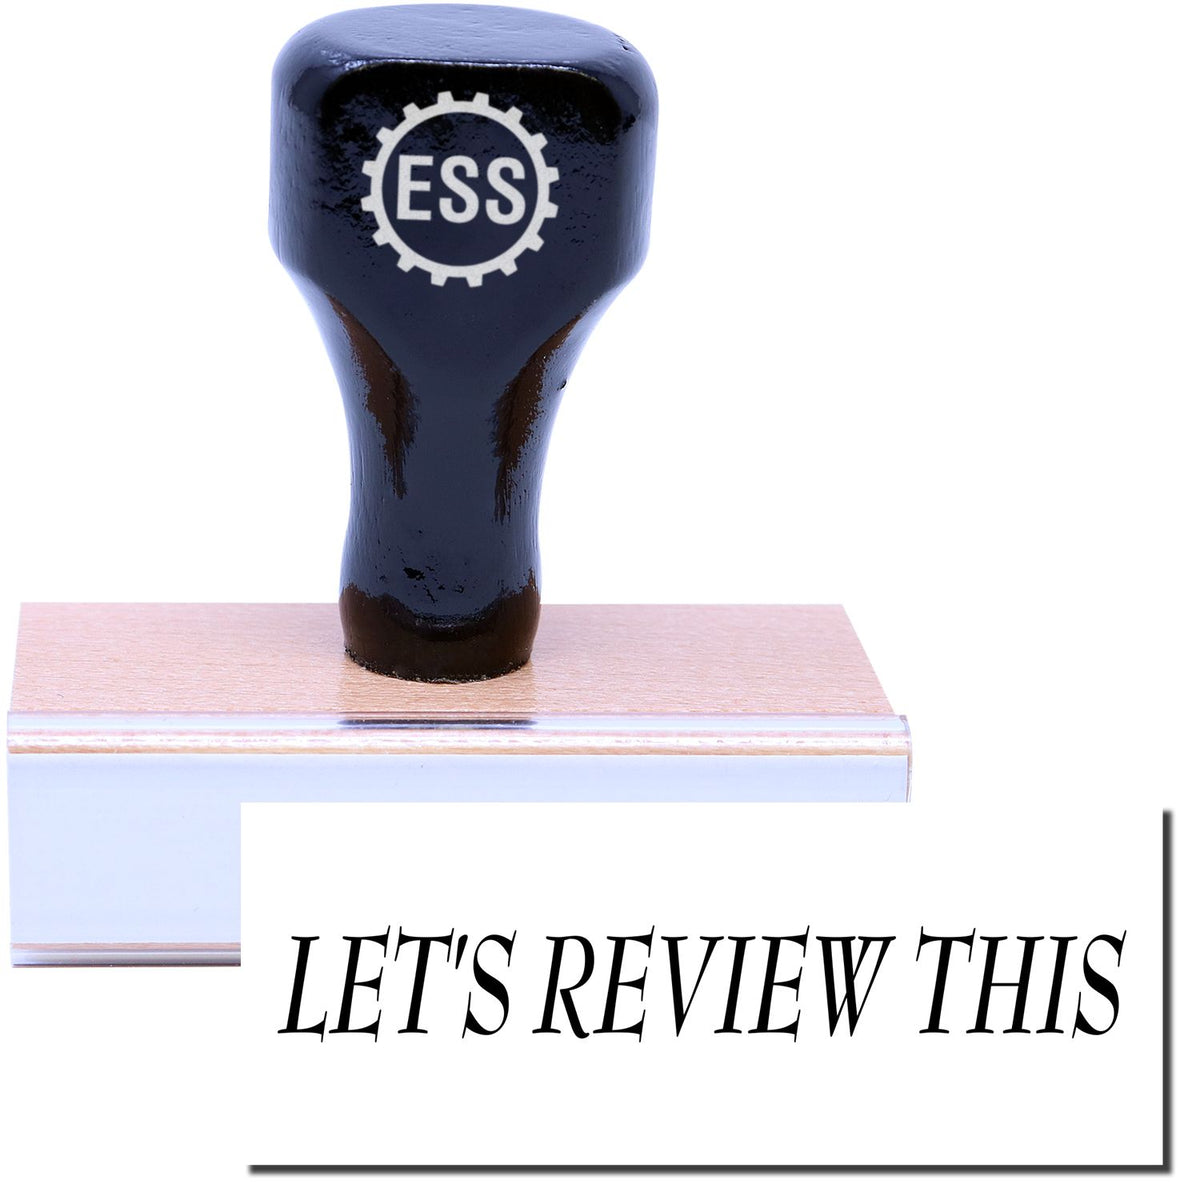 A stock office rubber stamp with a stamped image showing how the text &quot;LET&#39;S REVIEW THIS&quot; is displayed after stamping.